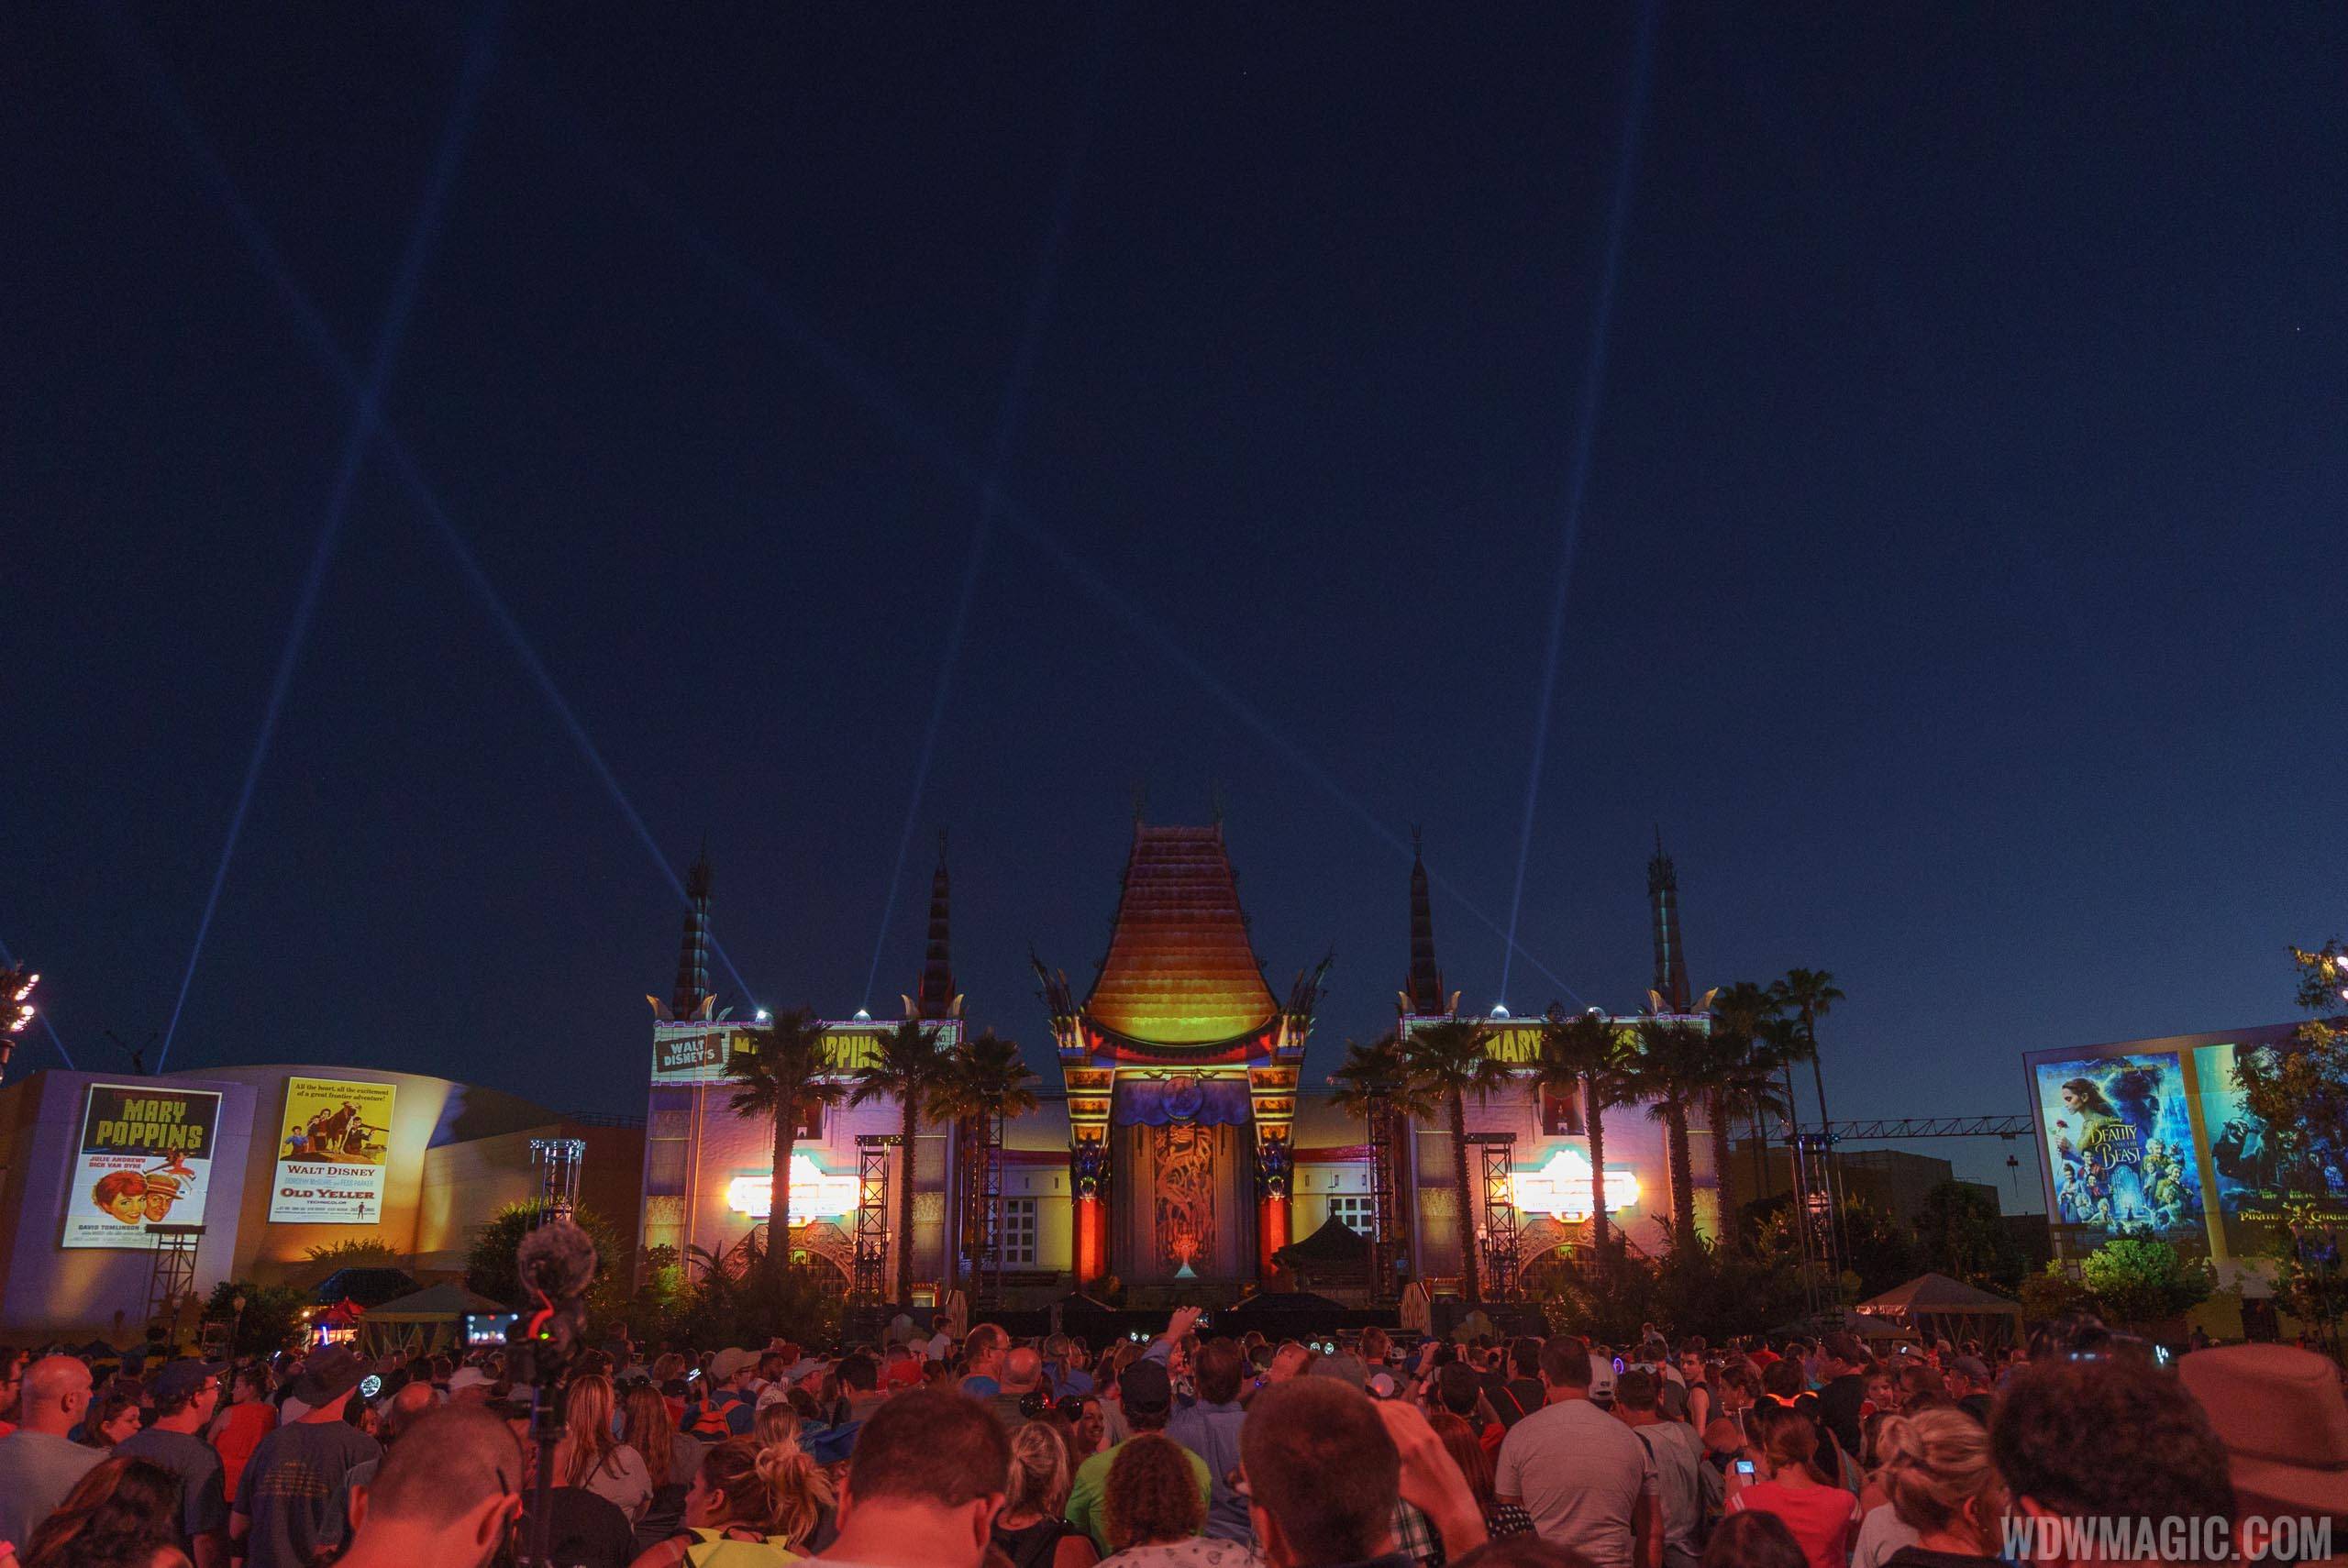 'Disney Movie Magic and 'Wonderful World of Animation' projection shows at Disney's Hollywood Studios return to the schedule